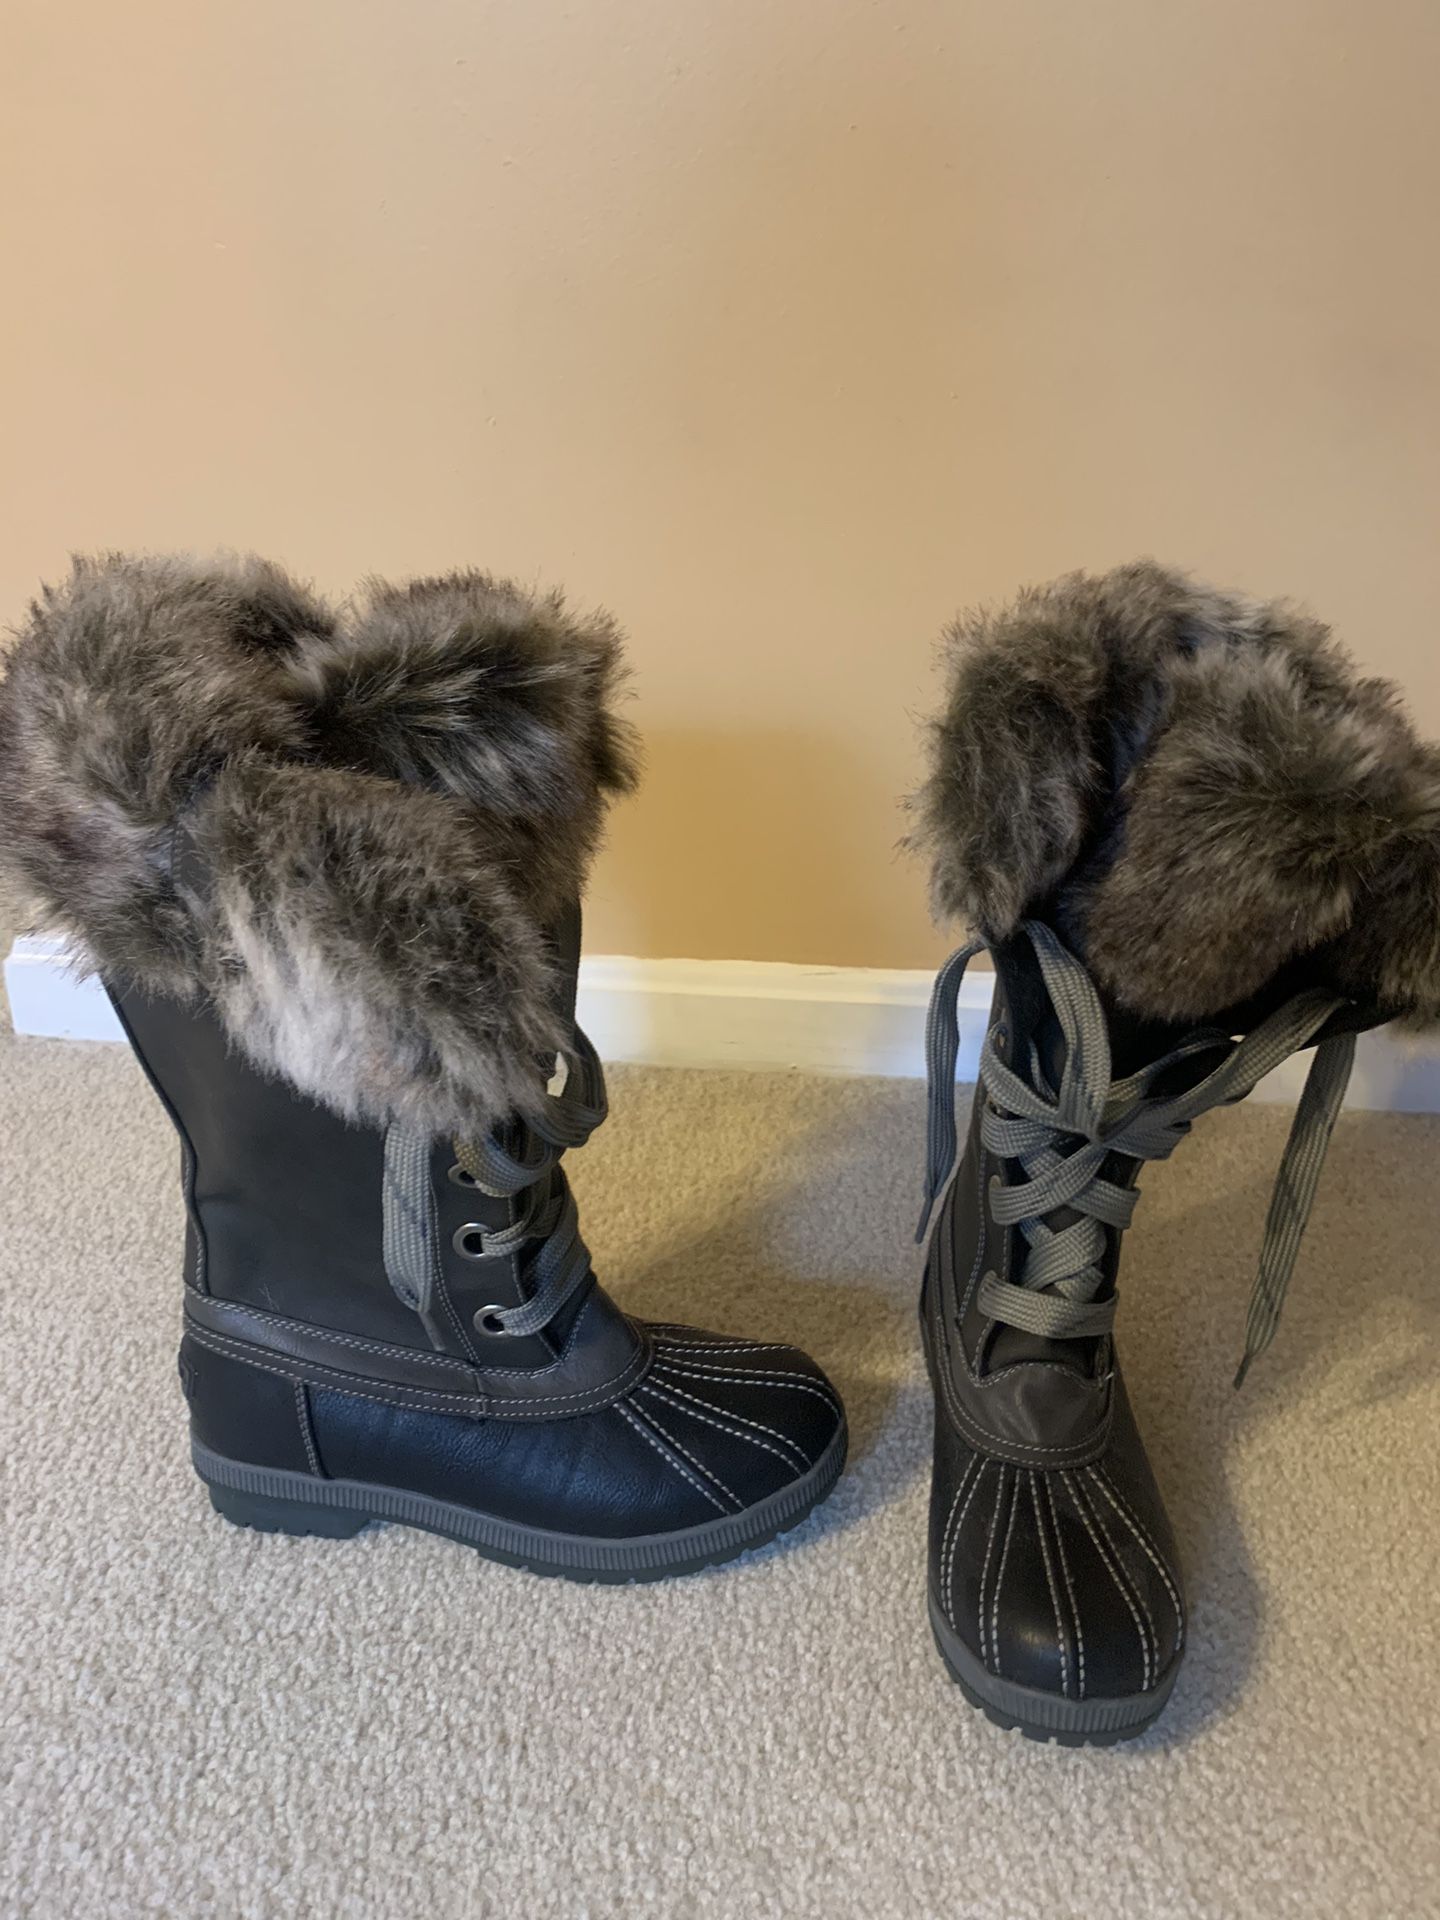 Winter Snow Boots For Ladies 